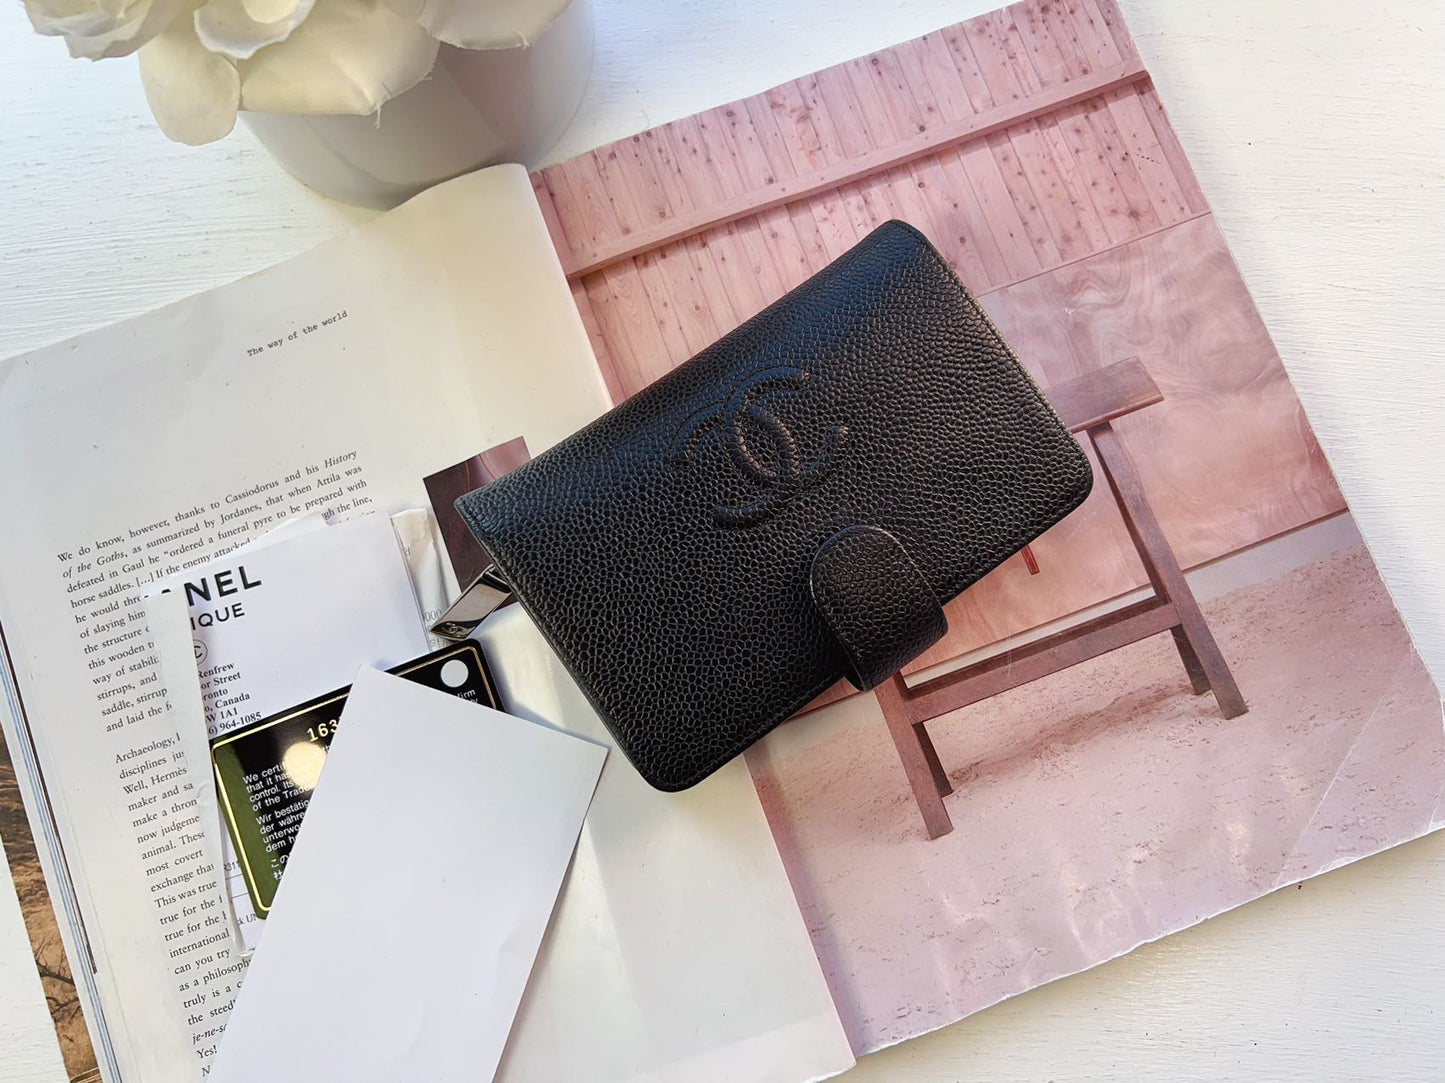 Chanel Black Caviar Timeless French Wallet